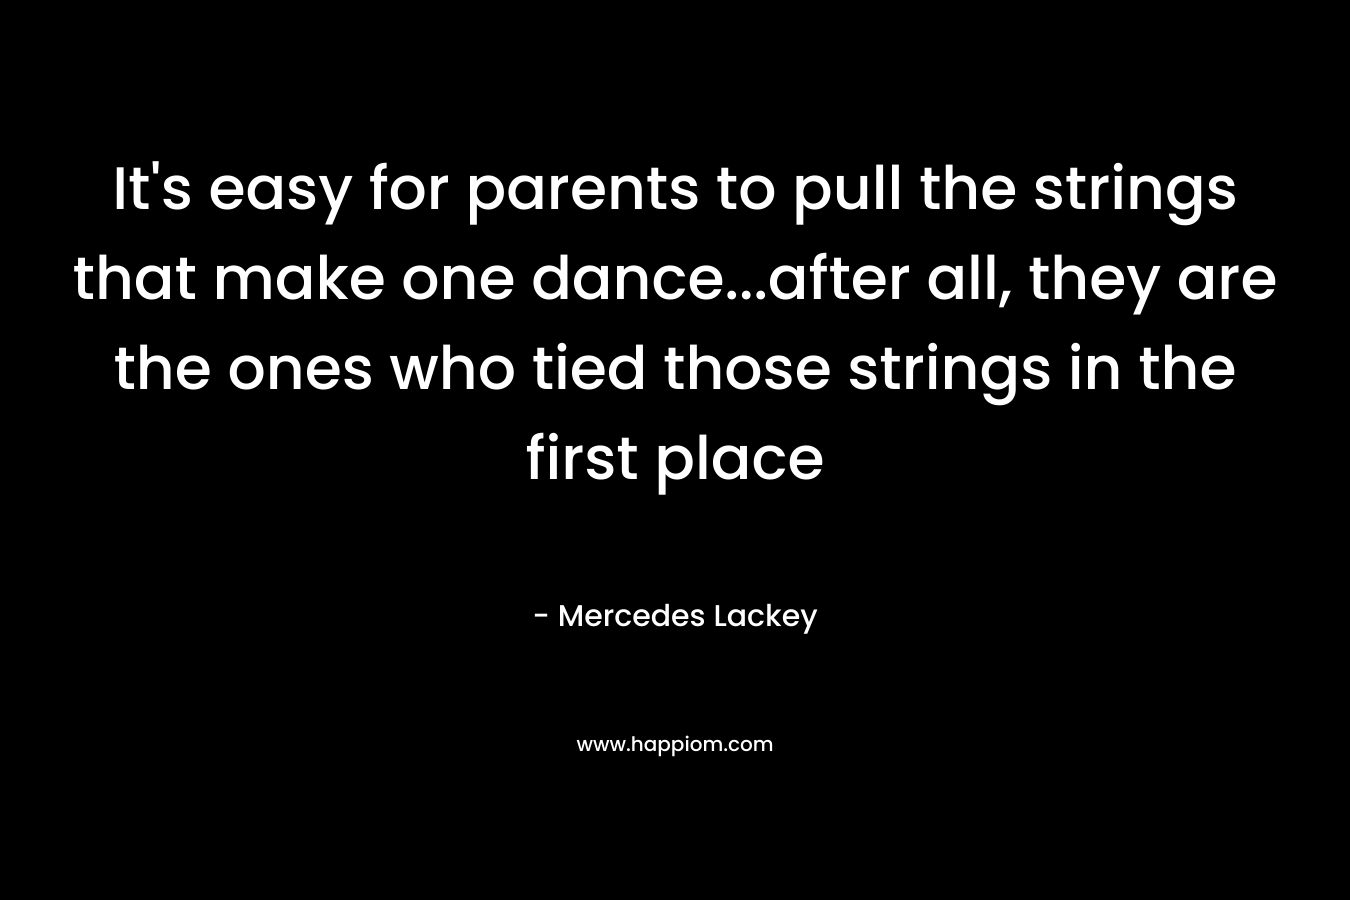 It's easy for parents to pull the strings that make one dance...after all, they are the ones who tied those strings in the first place